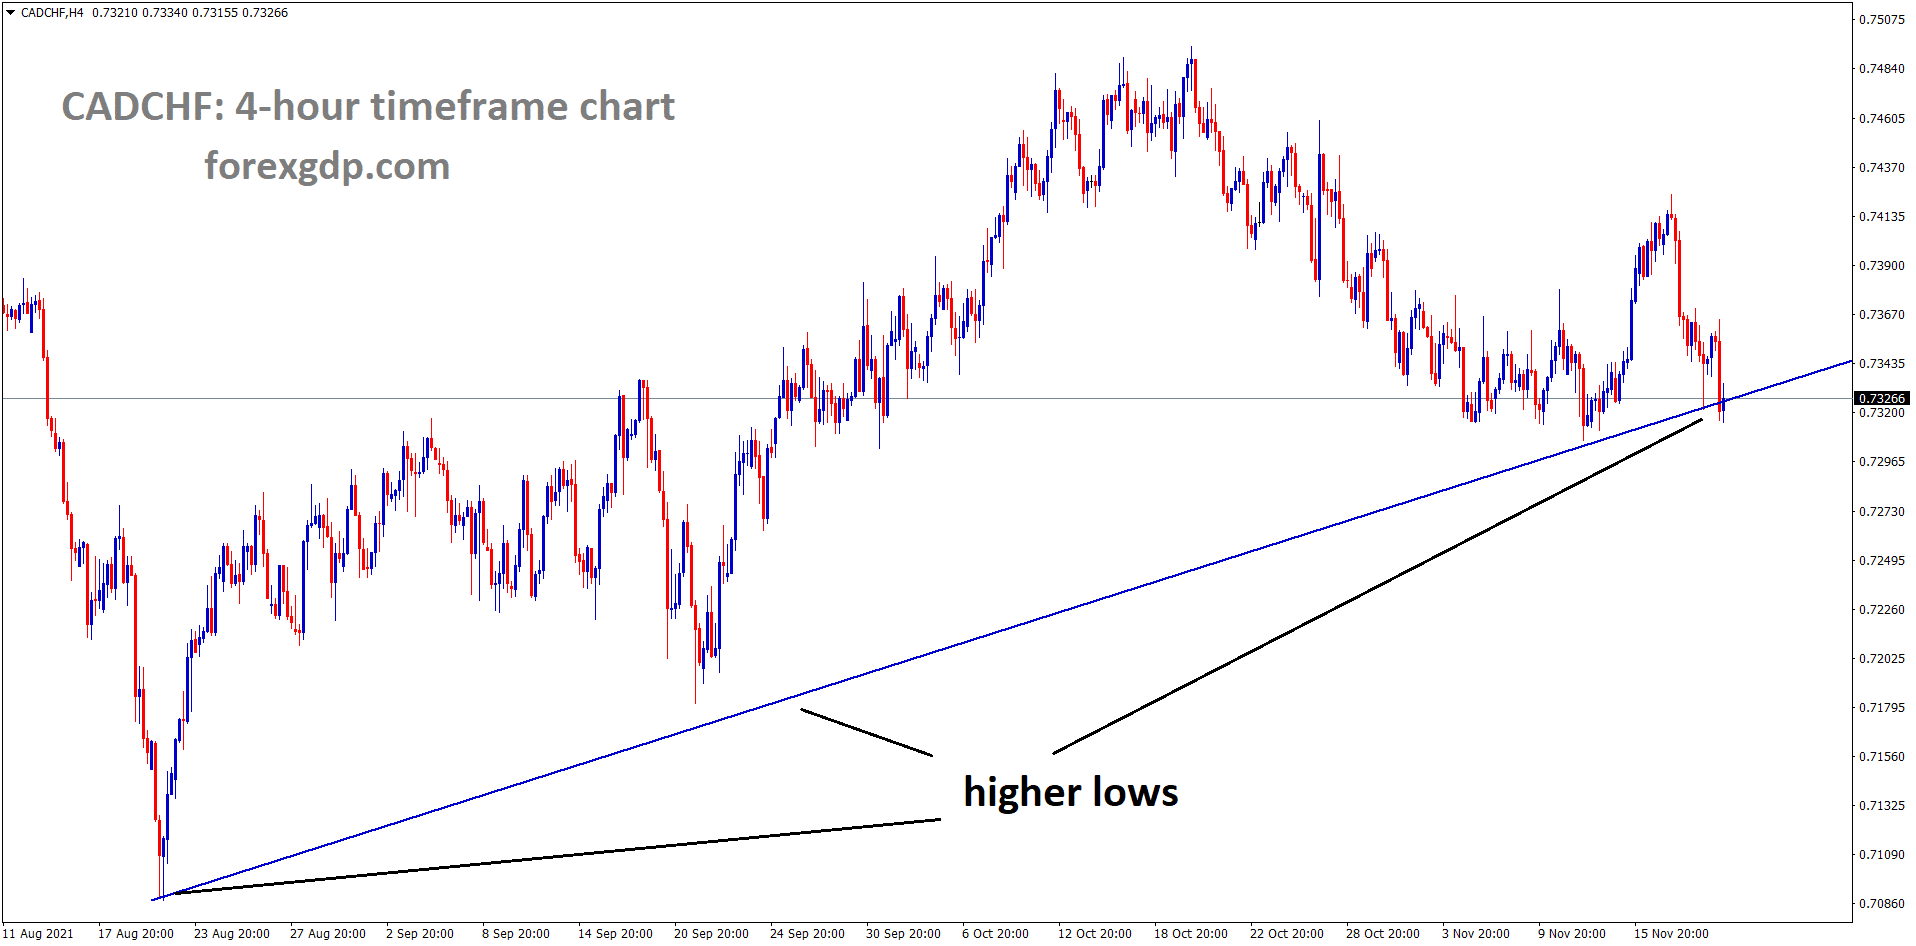 CADCHF is moving in the Bullish trendline and the market reached the Higher low area of the Bullish trendline